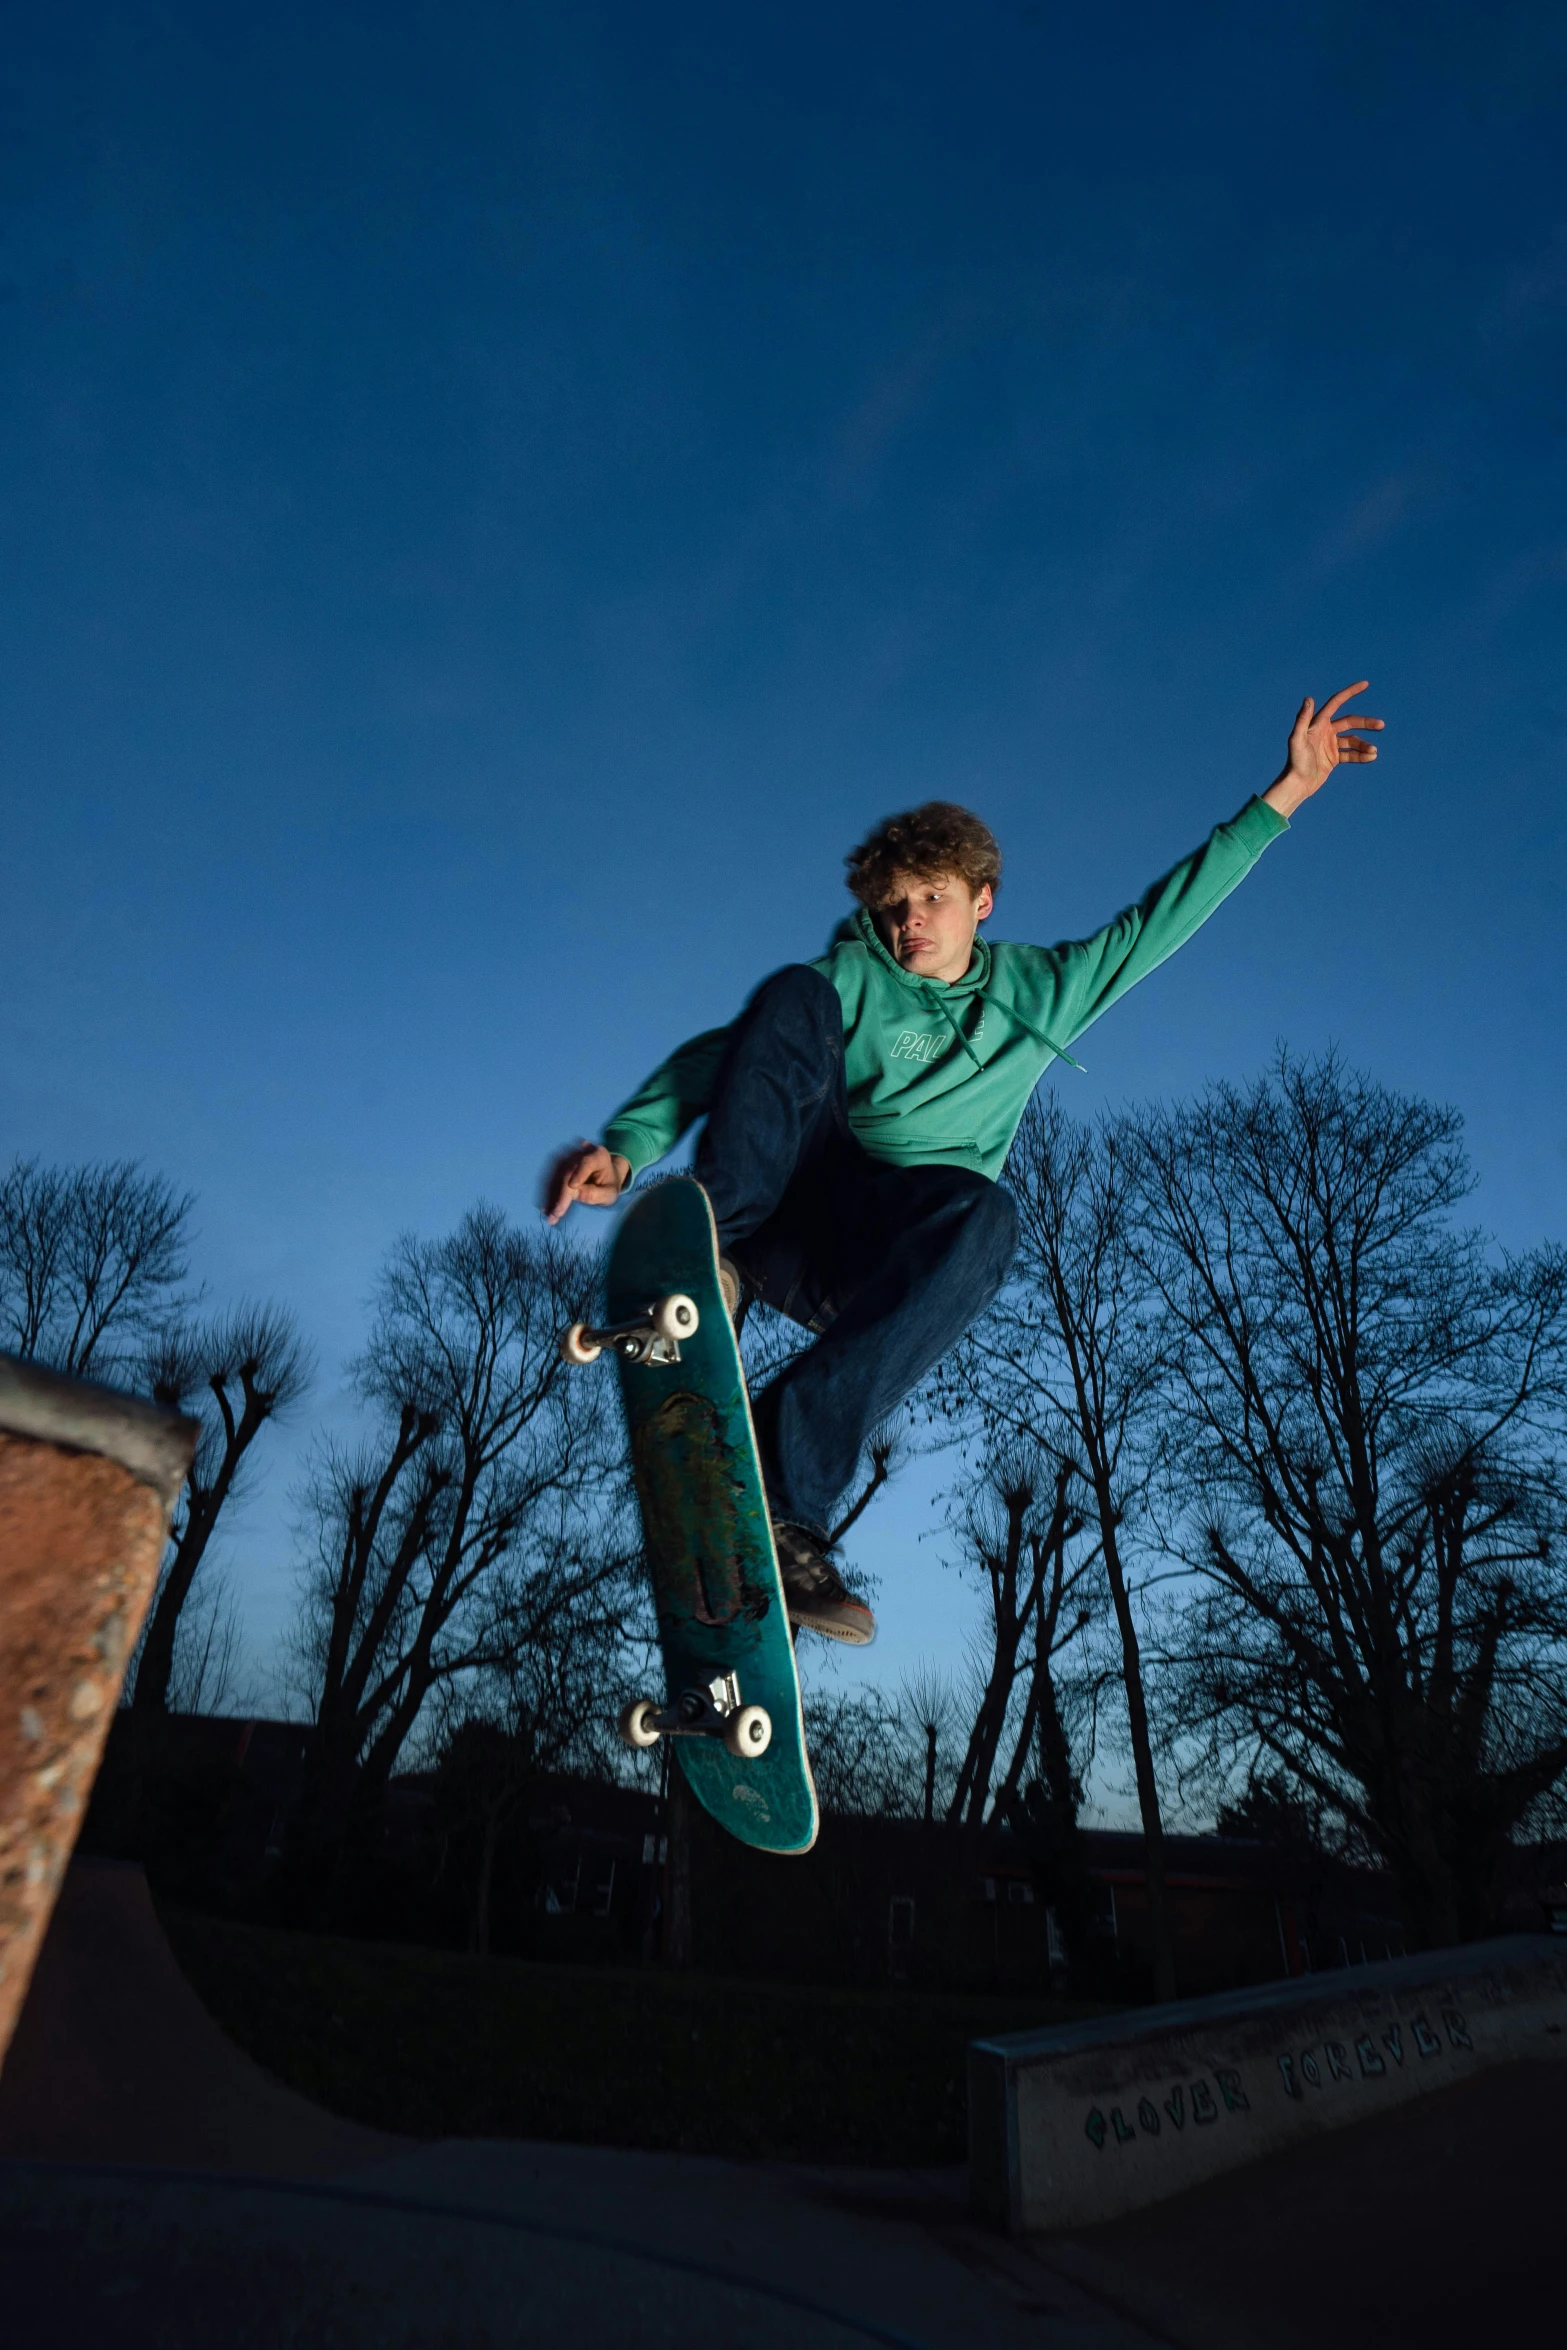 a skateboarder flying through the air on his skate board